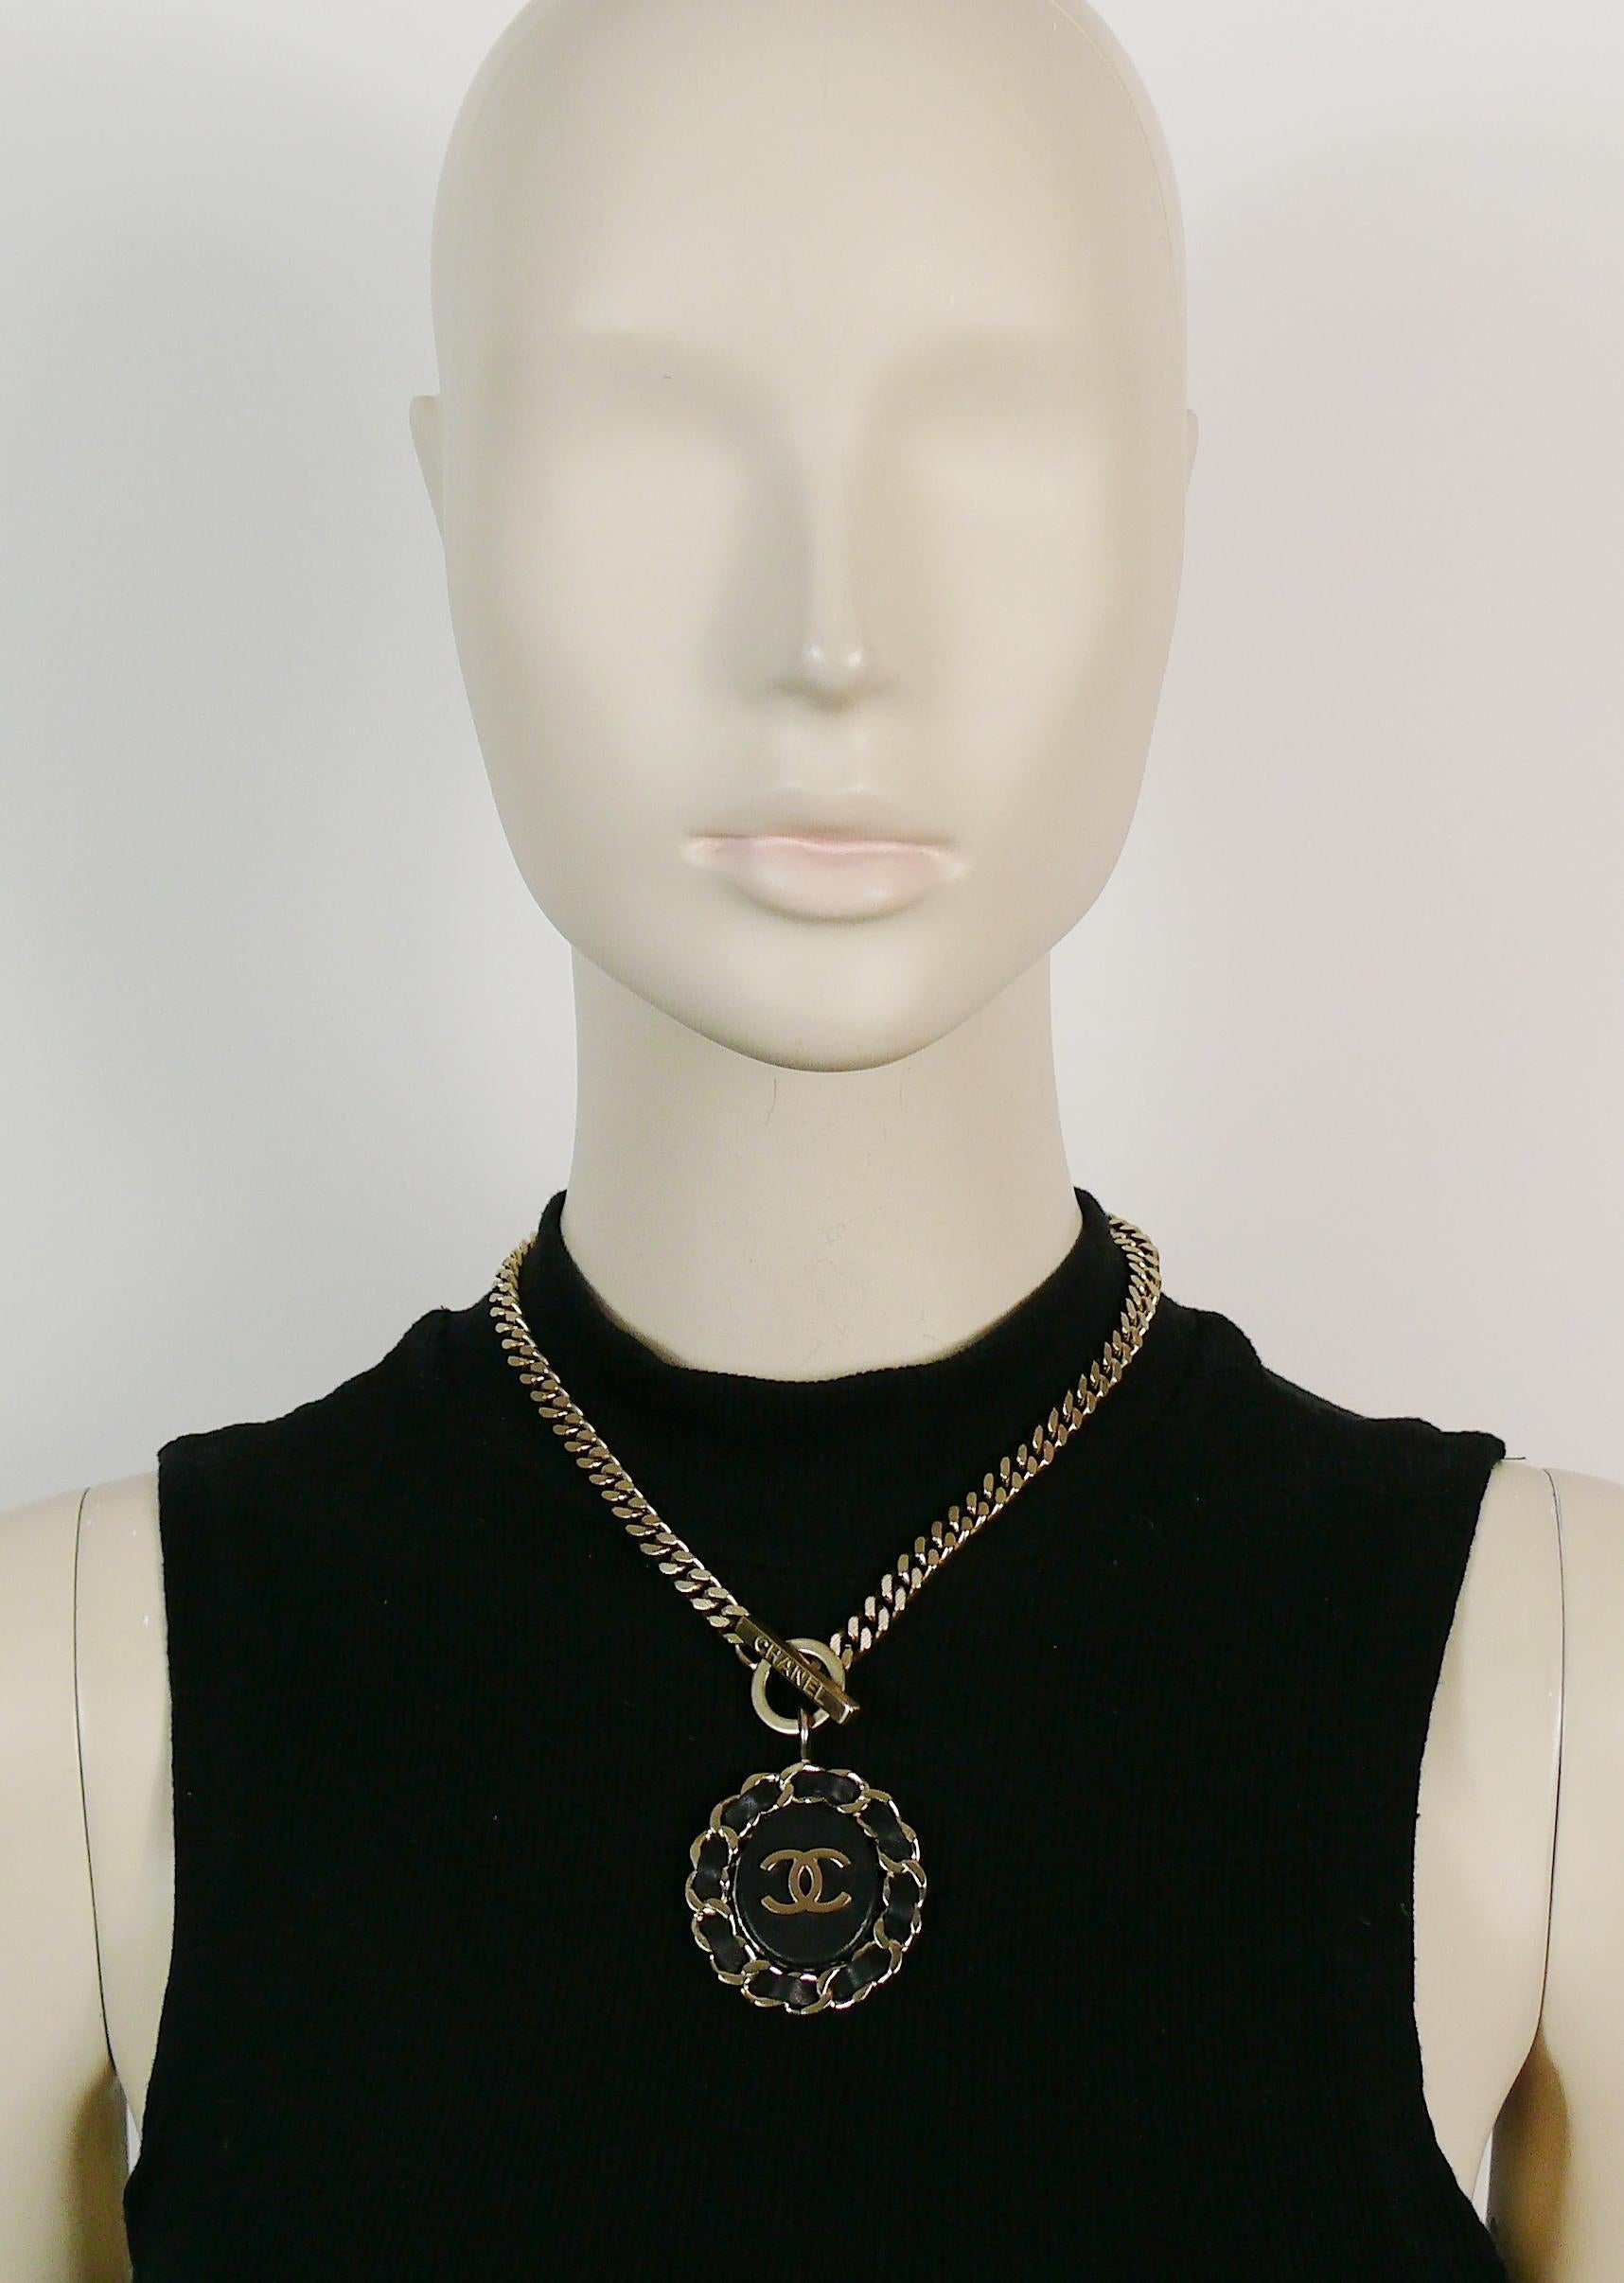 CHANEL pale gold toned chain link necklace featuring a CC oval pendant embellished with black lambskin leather.

T-bar claps and toggle closure.

Embossed CHANEL B16 B MADE IN ITALY.
Embossed CHANEL on the T-bar.
Private sale S mark engraved on the